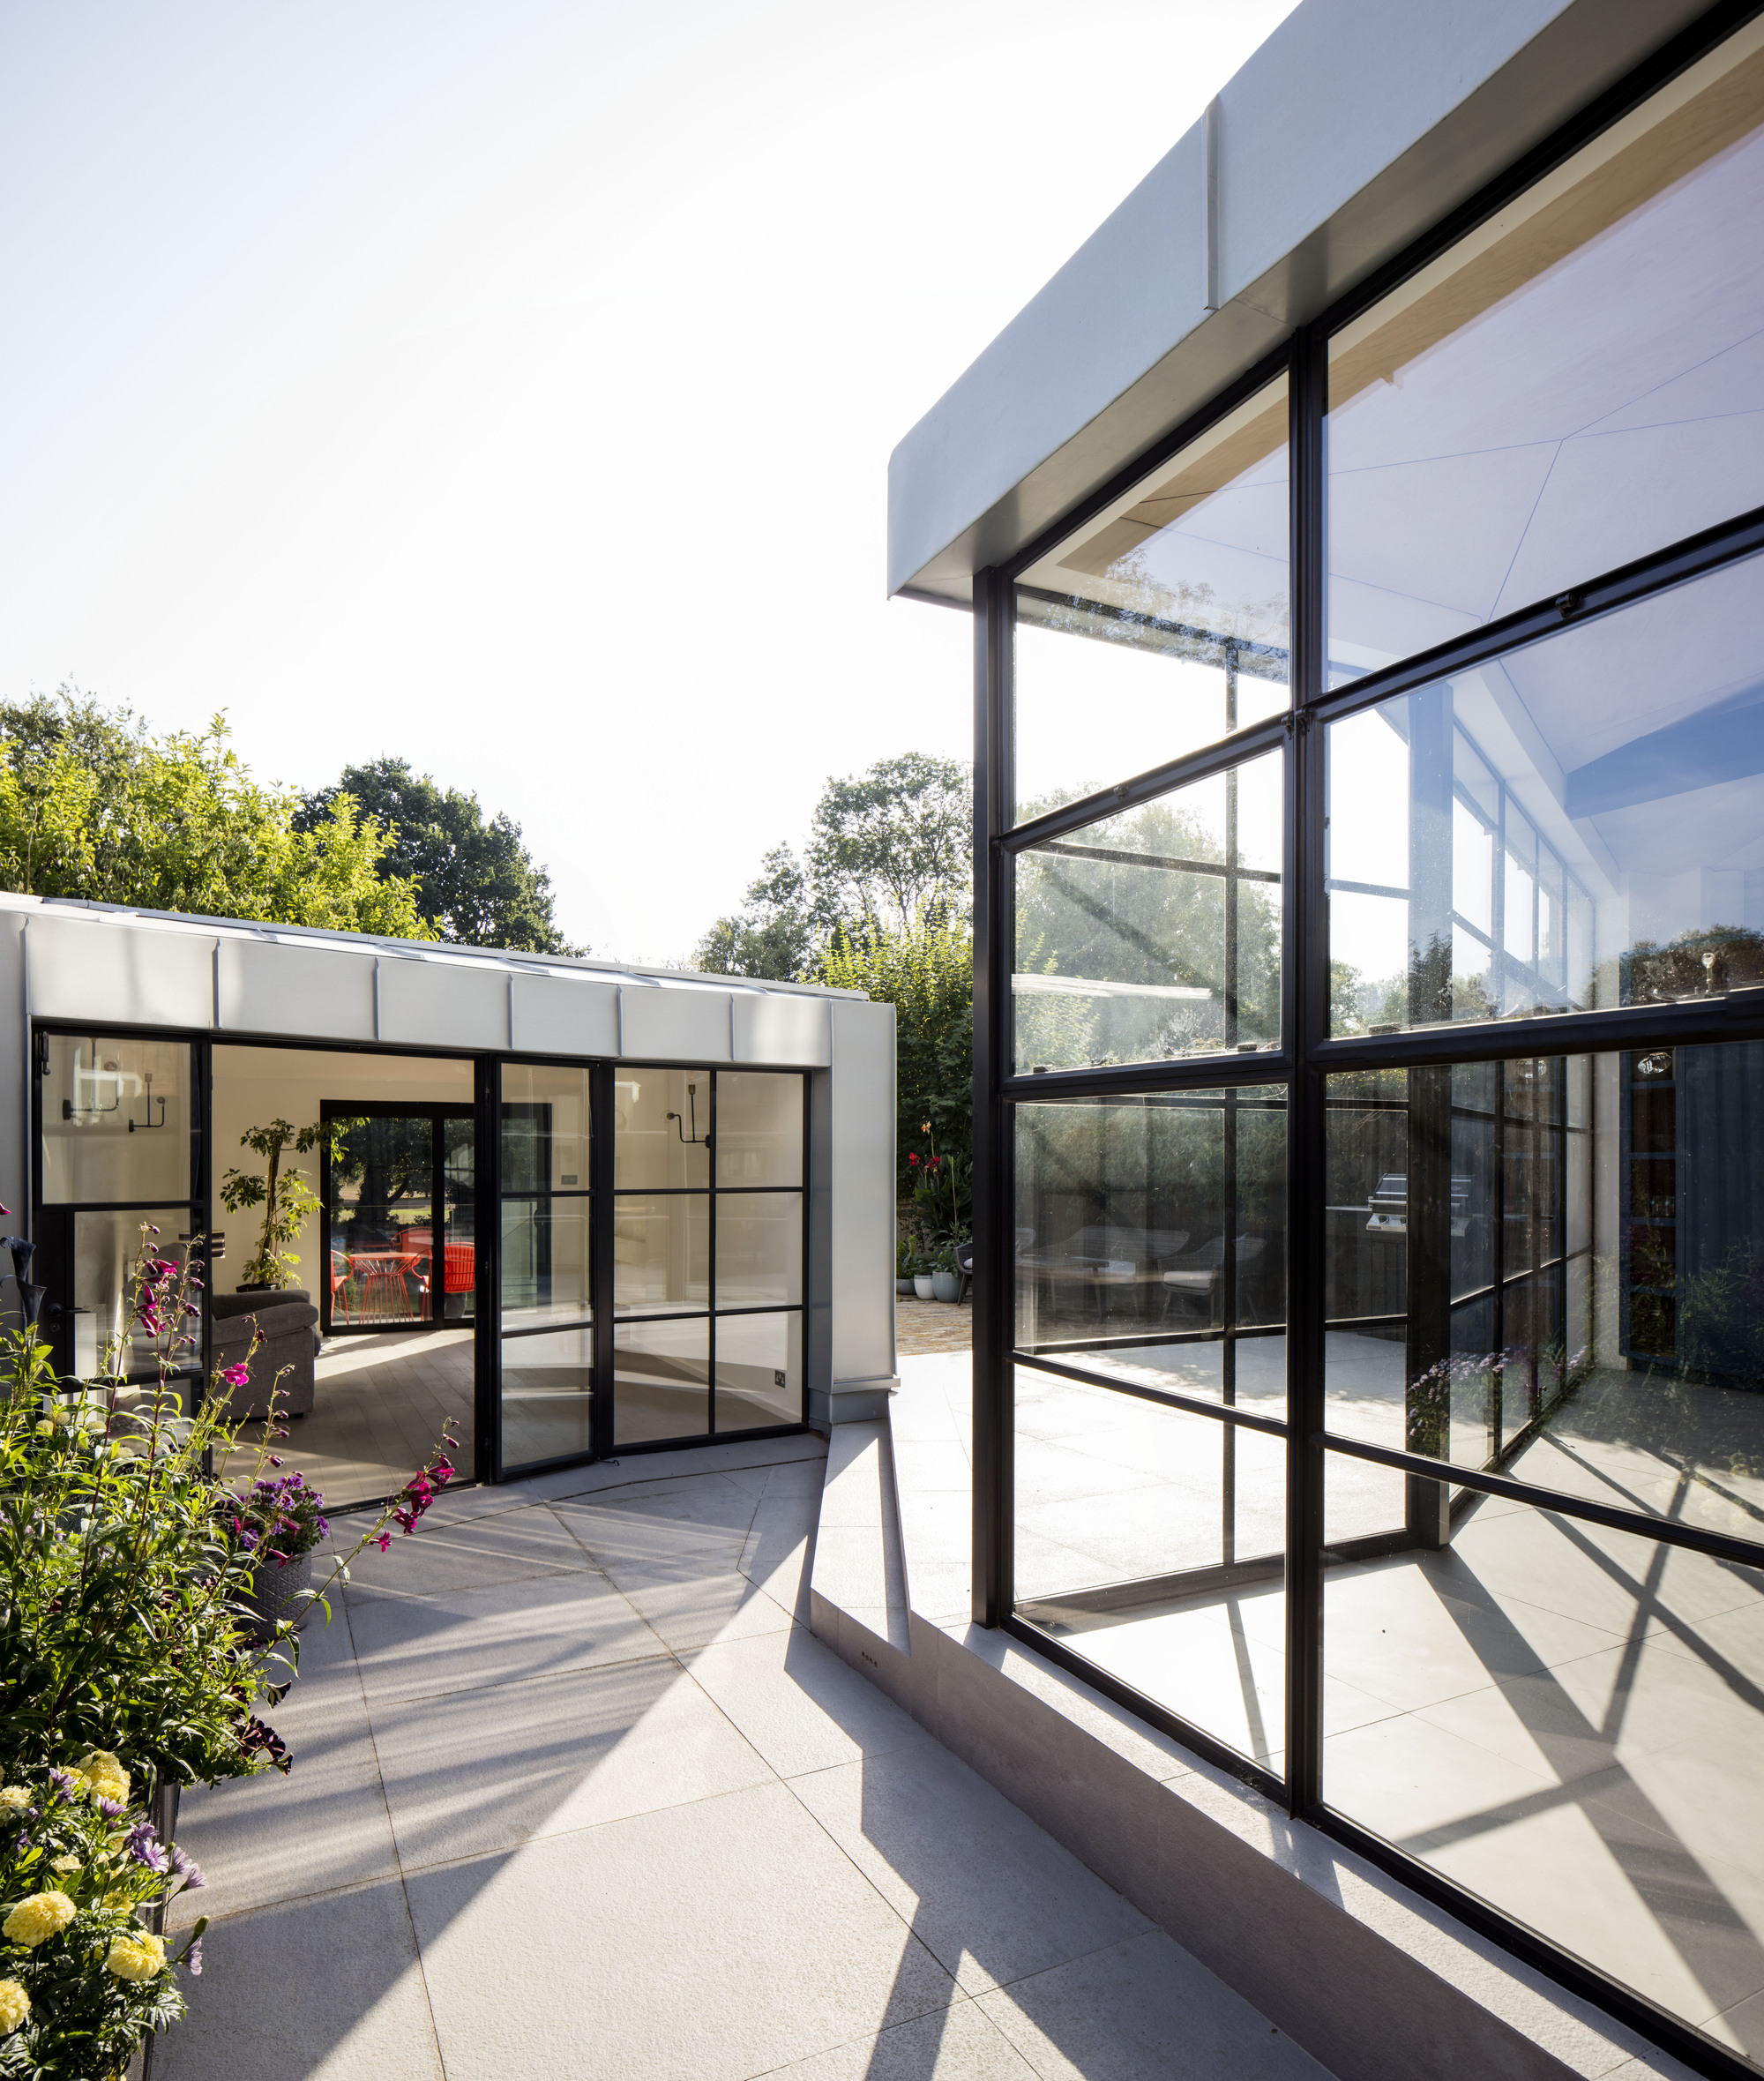 New-rear-extension-and-garden-room-of-the-house-with-glass-walls-and-ample-natural-light-86319